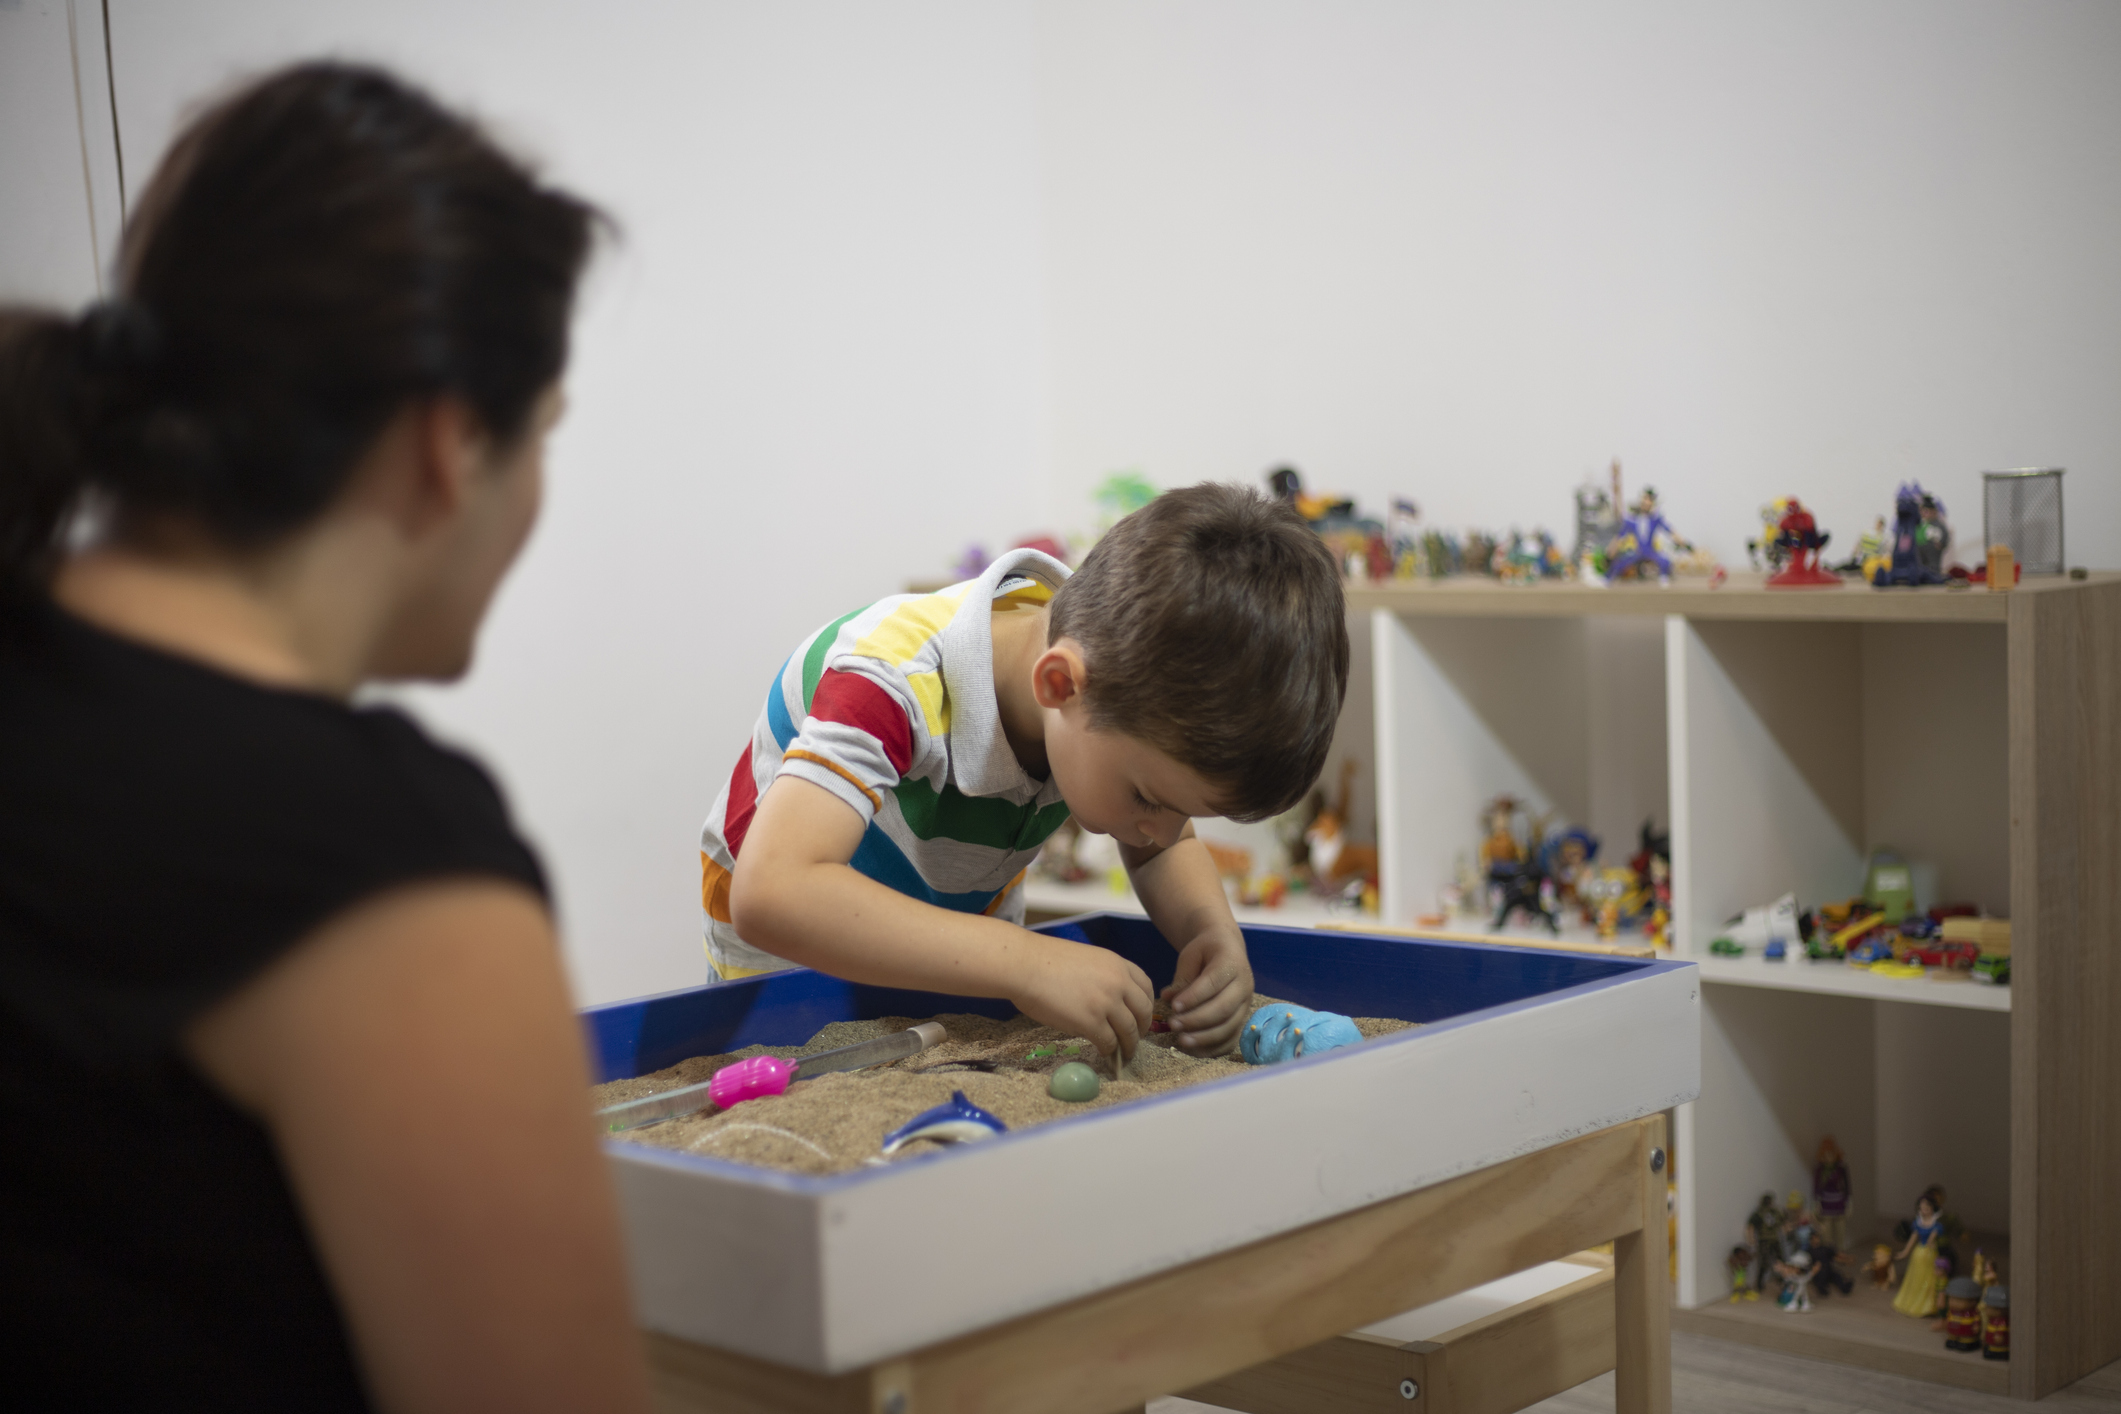 Photo of a child playing in a sand tray with a play therapist looking on